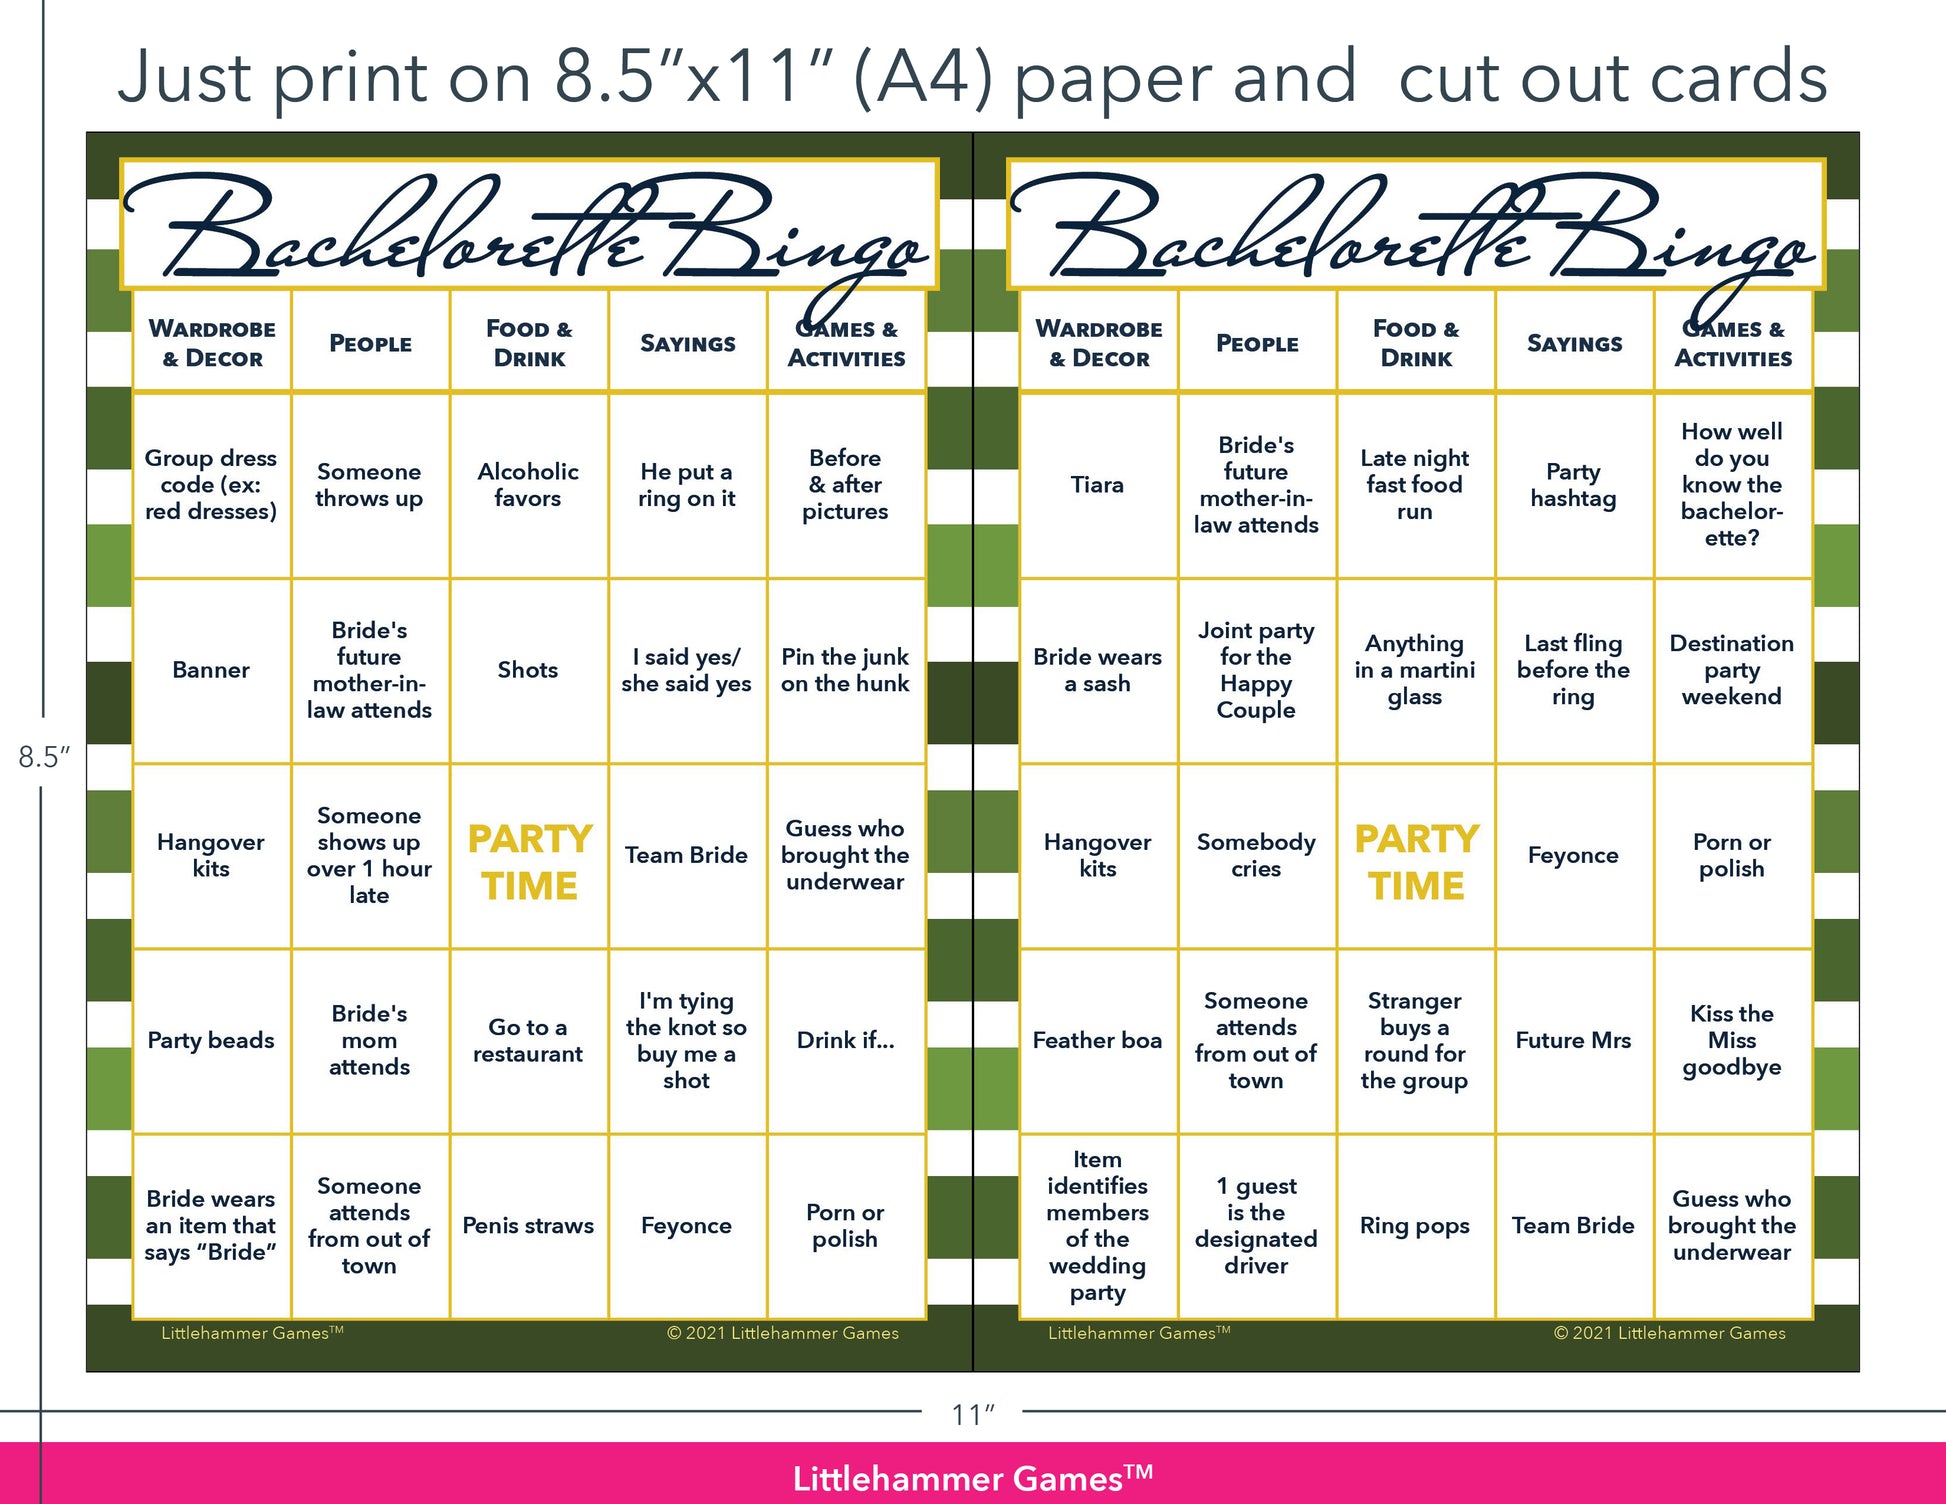 Green-striped Bachelorette Bingo game cards with printing instructions